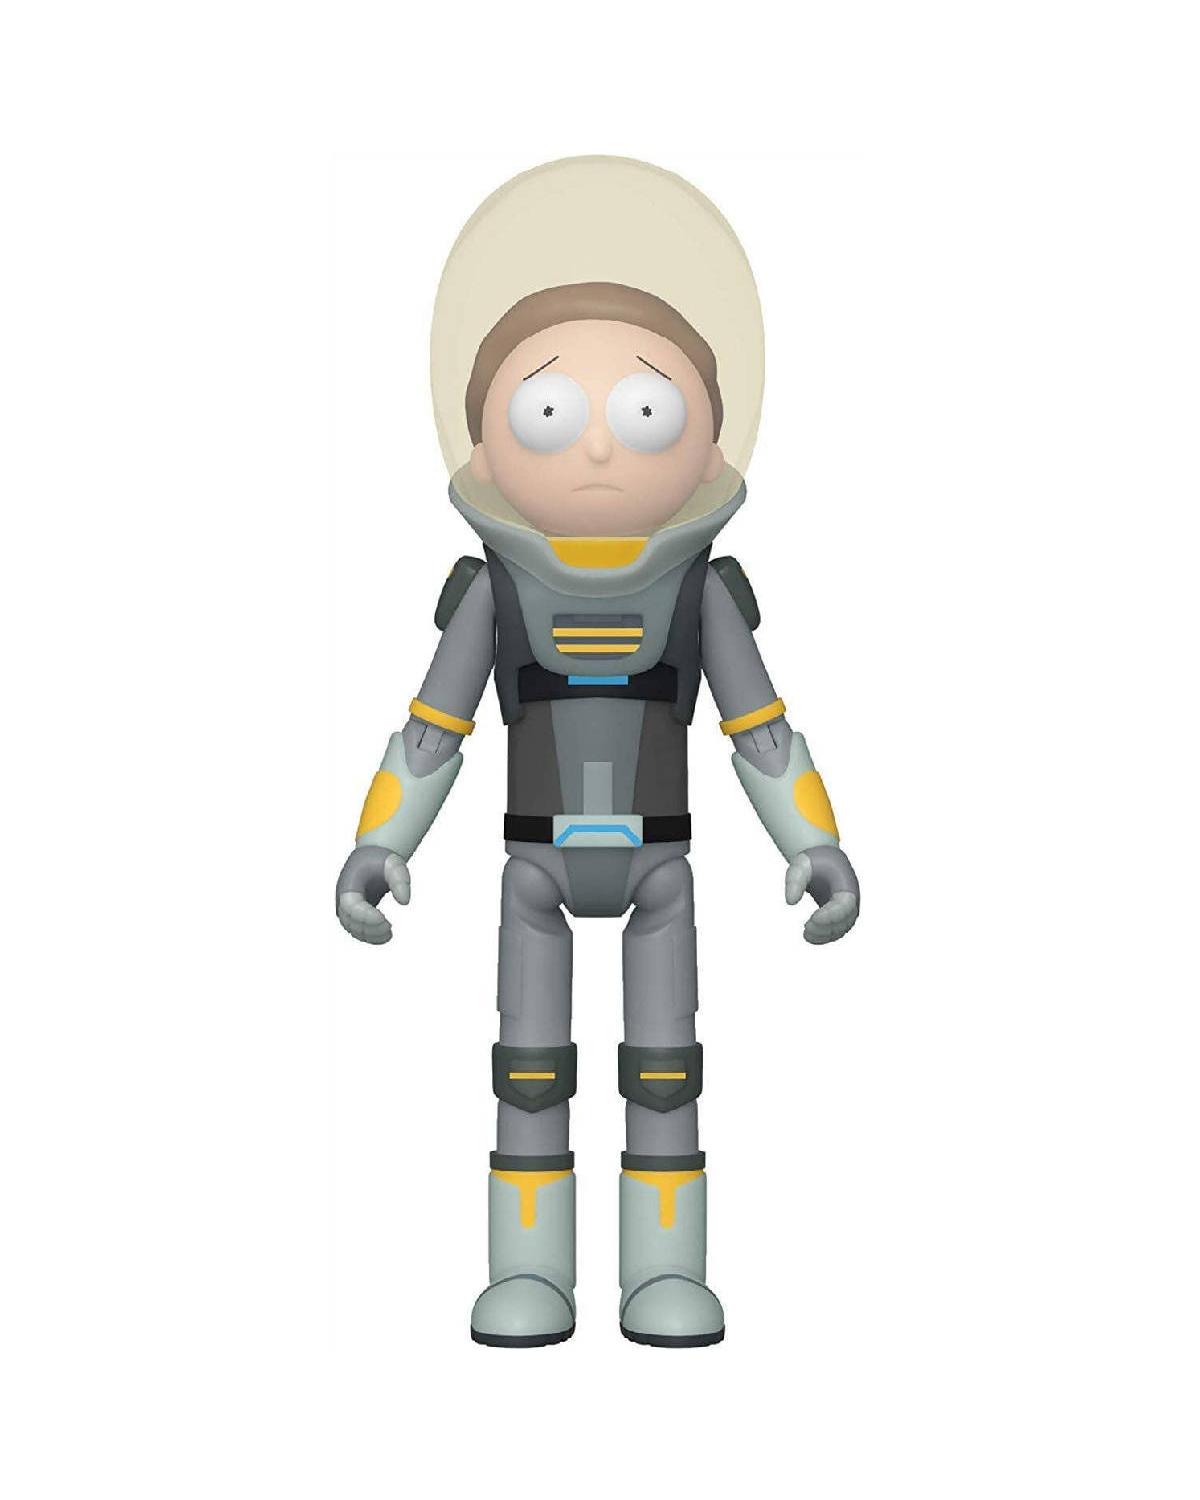 ACTION FIGURE - RICK AND MORTY - SPACE SUIT MORTY